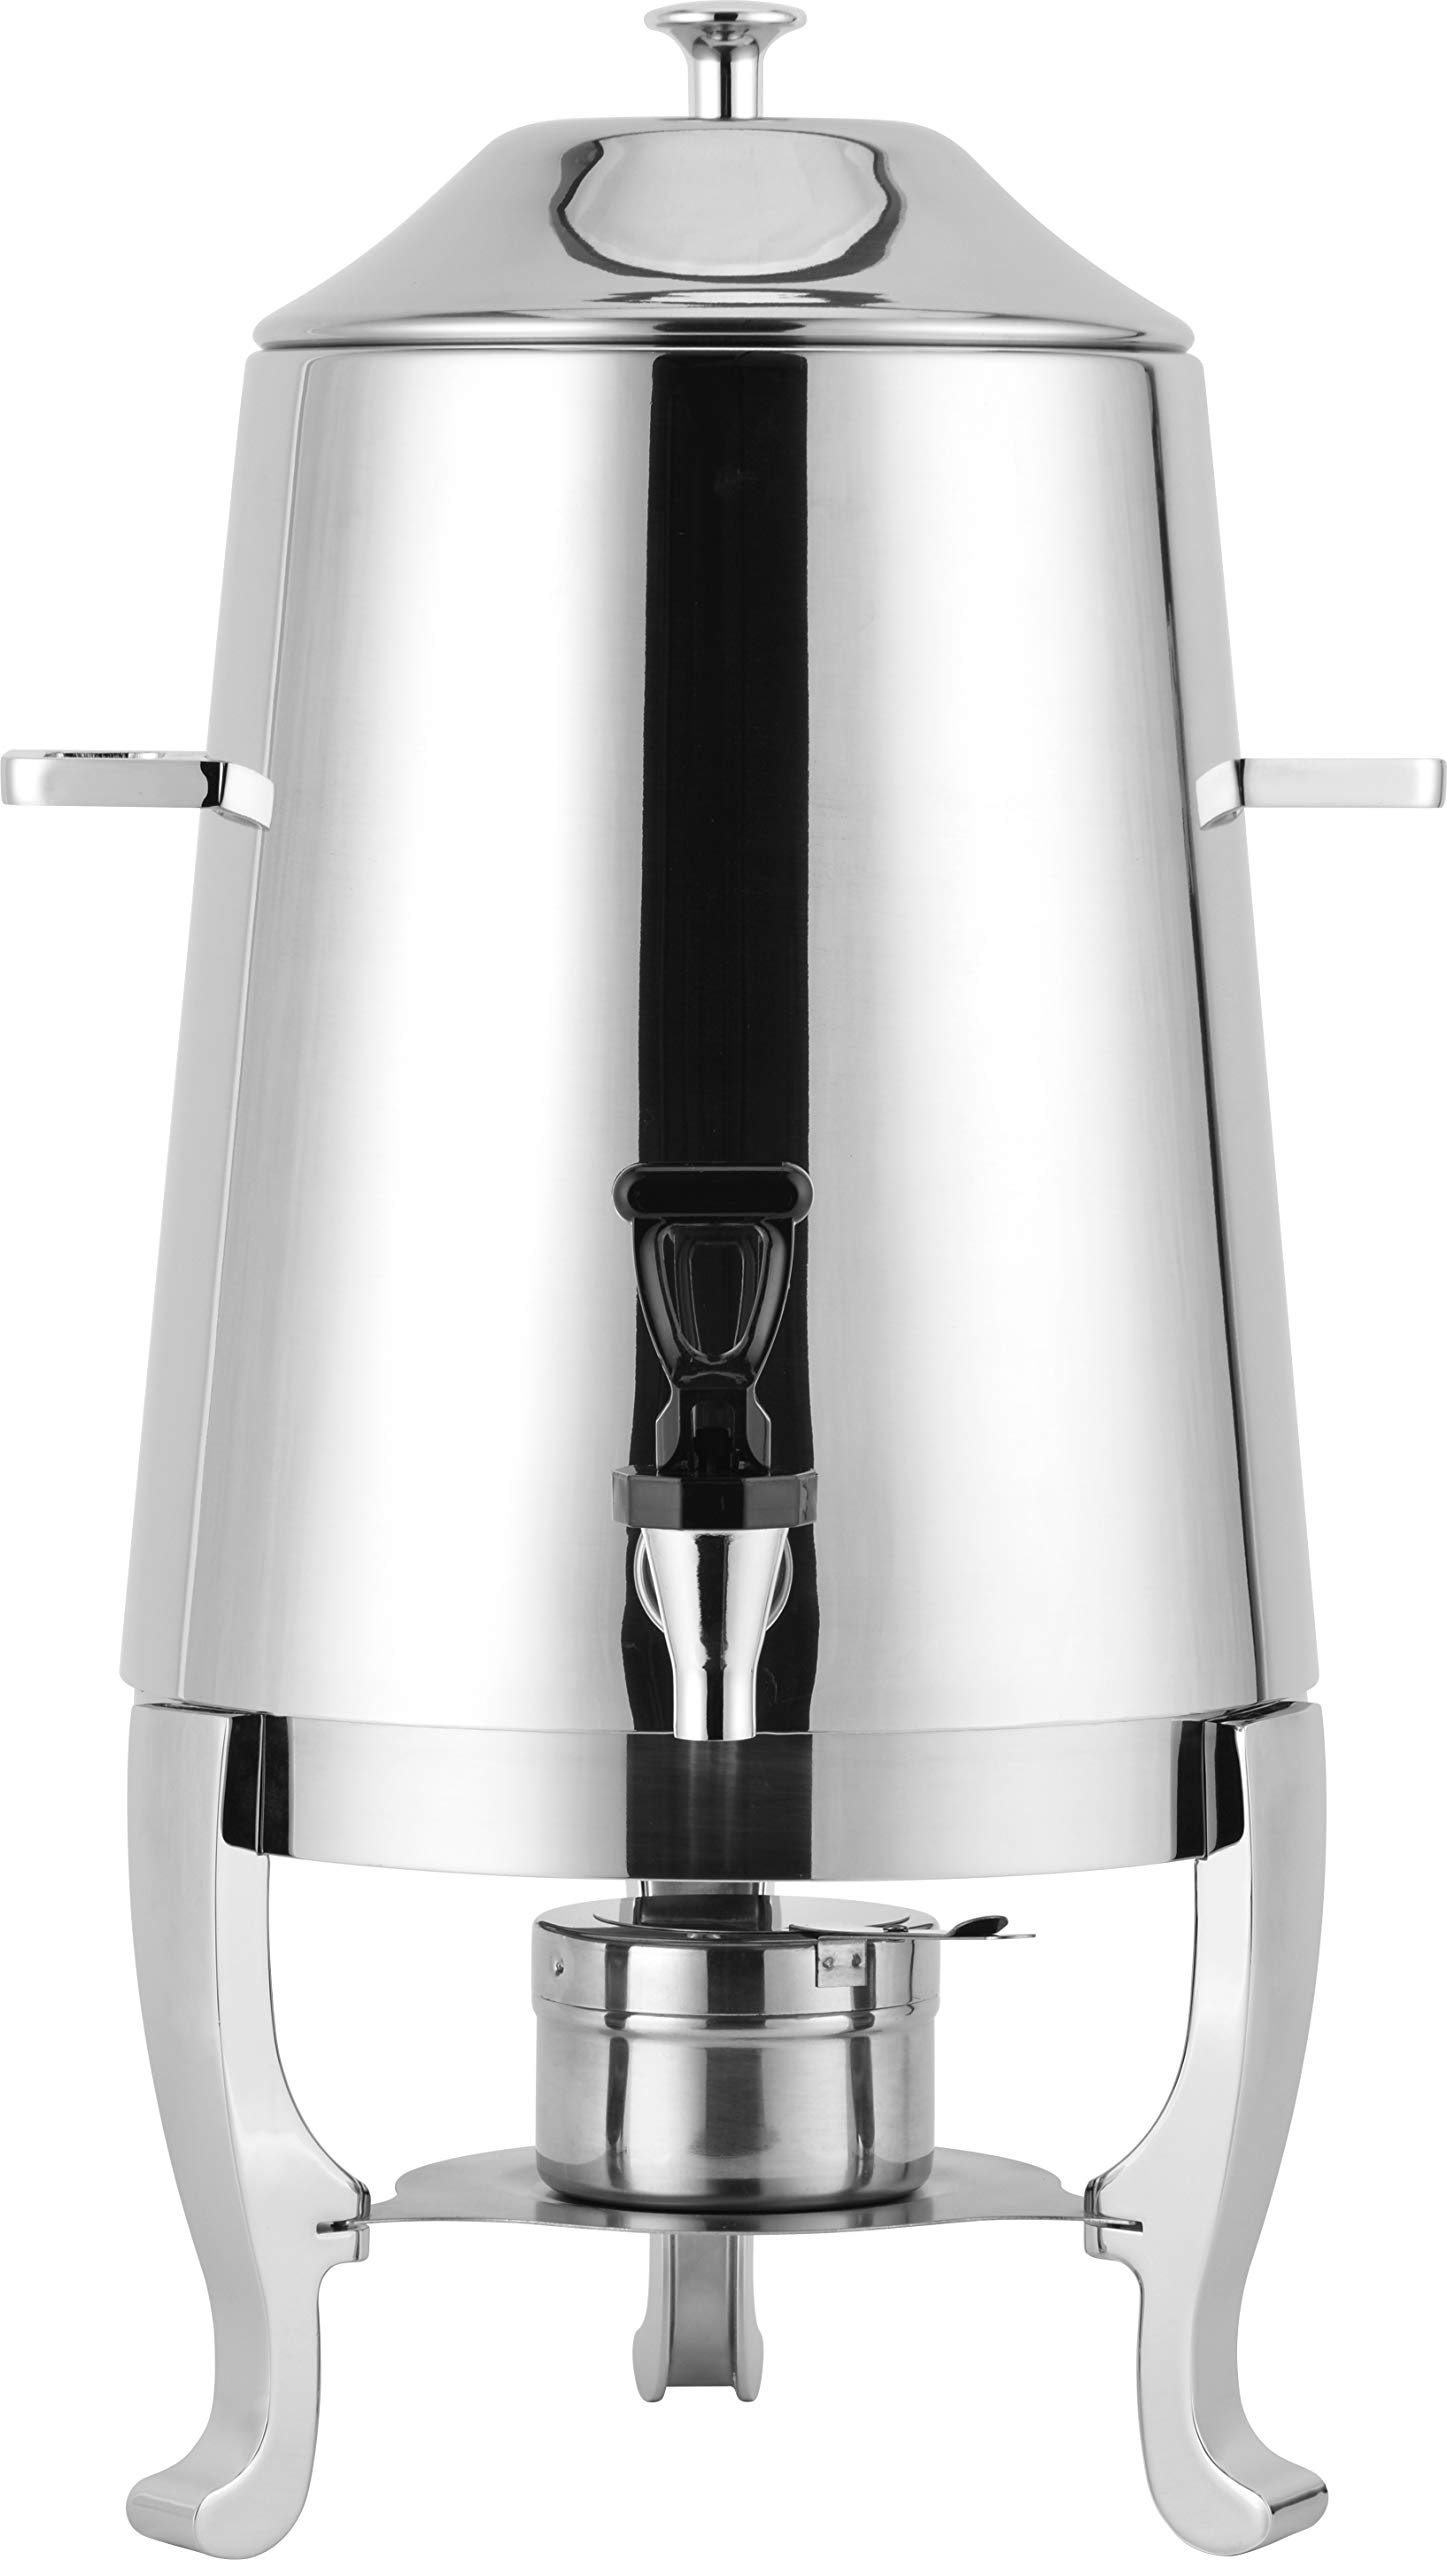 BriSunshine 13L Hot Beverage Dispenser, Stainless Steel Coffee Chafer Urn  Hot Drinks Dispenser with Spigot for Parties Event Buffet Catering (3.5